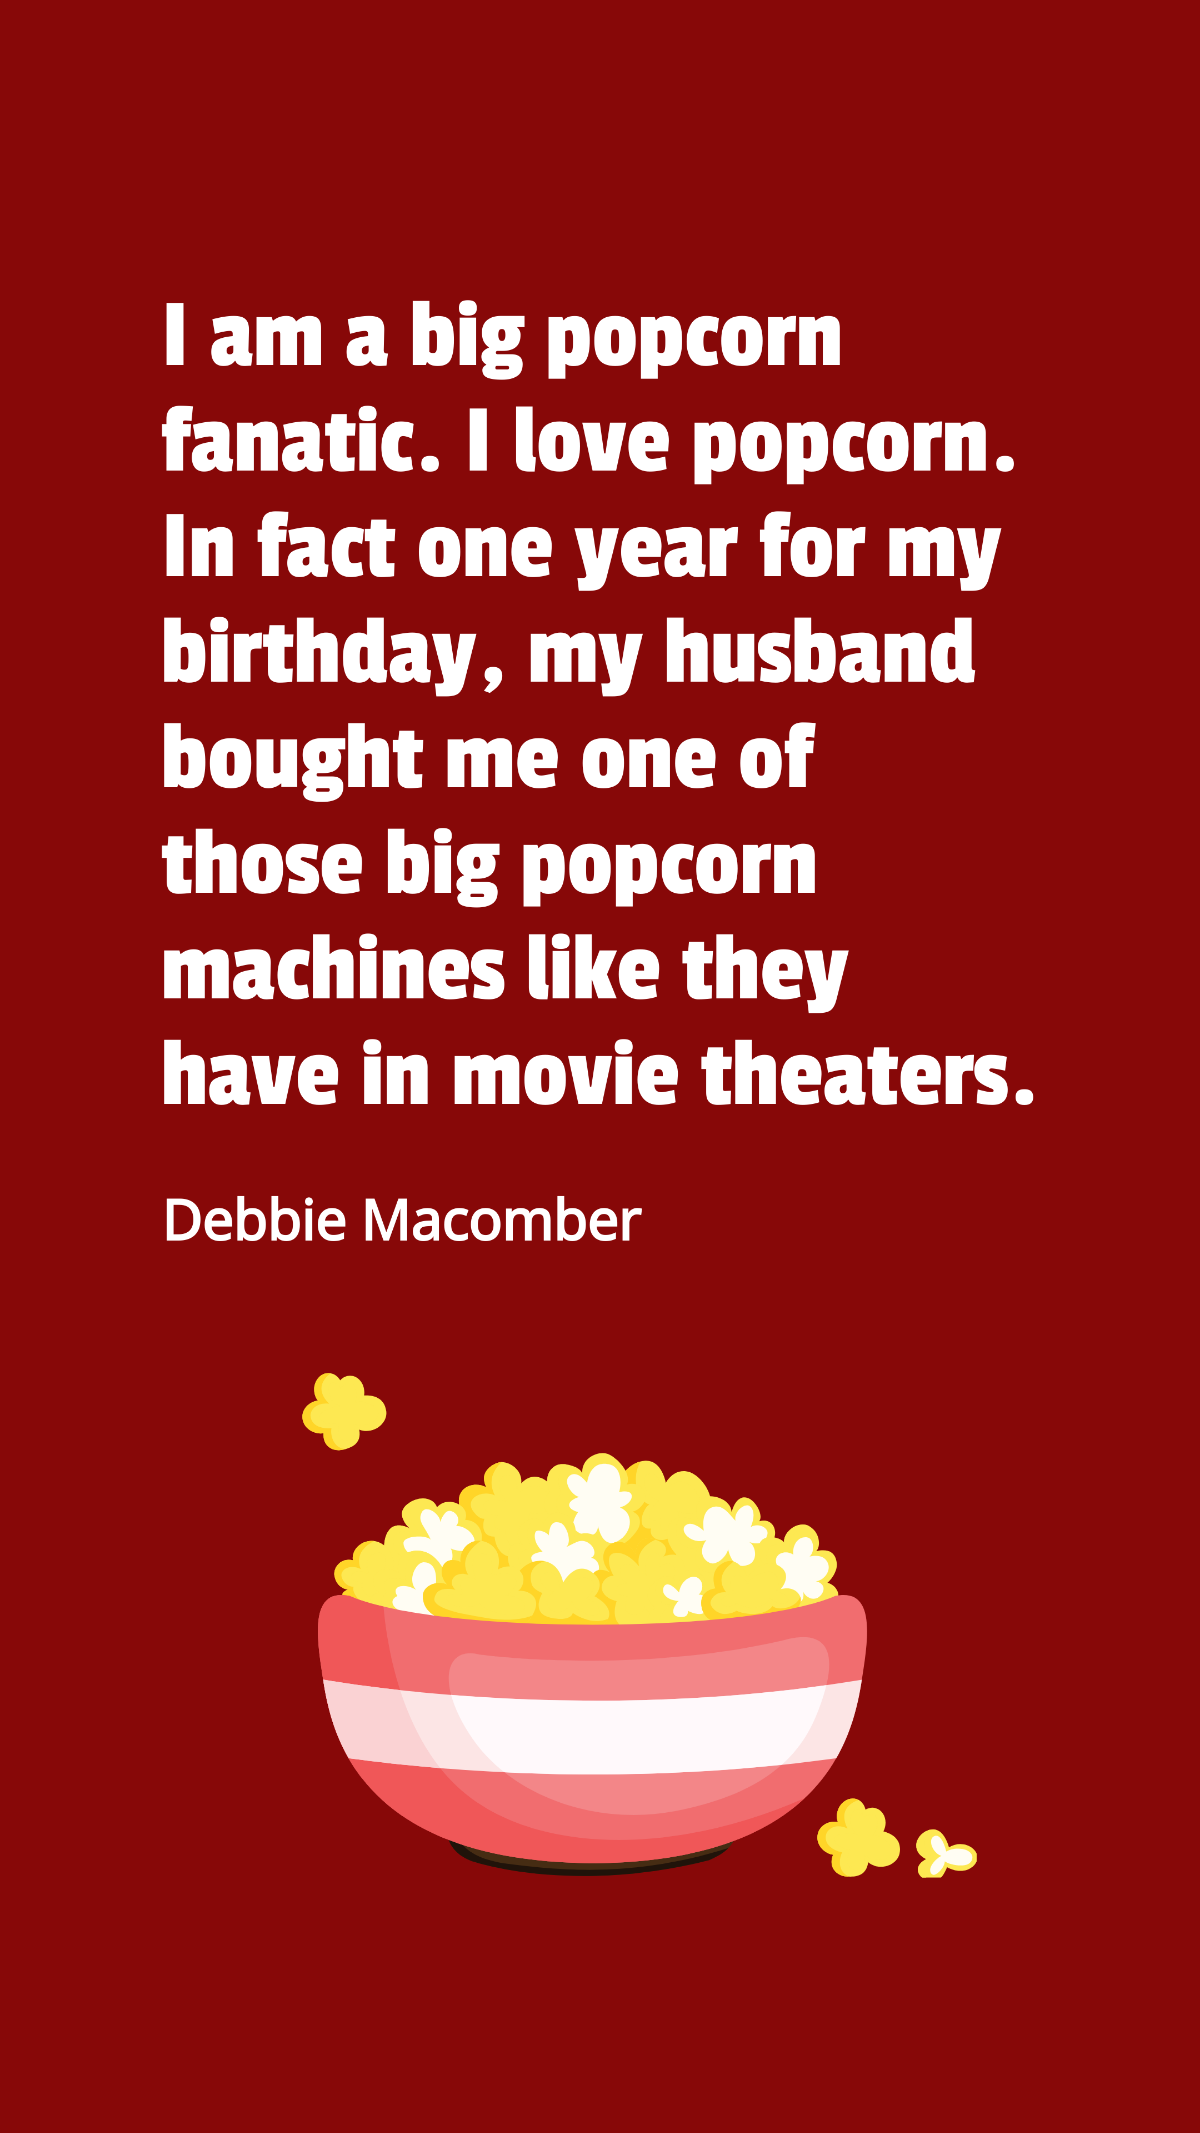 Debbie Macomber - I am a big popcorn fanatic. I love popcorn. In fact one year for my birthday, my husband bought me one of those big popcorn machines like they have in movie theaters.